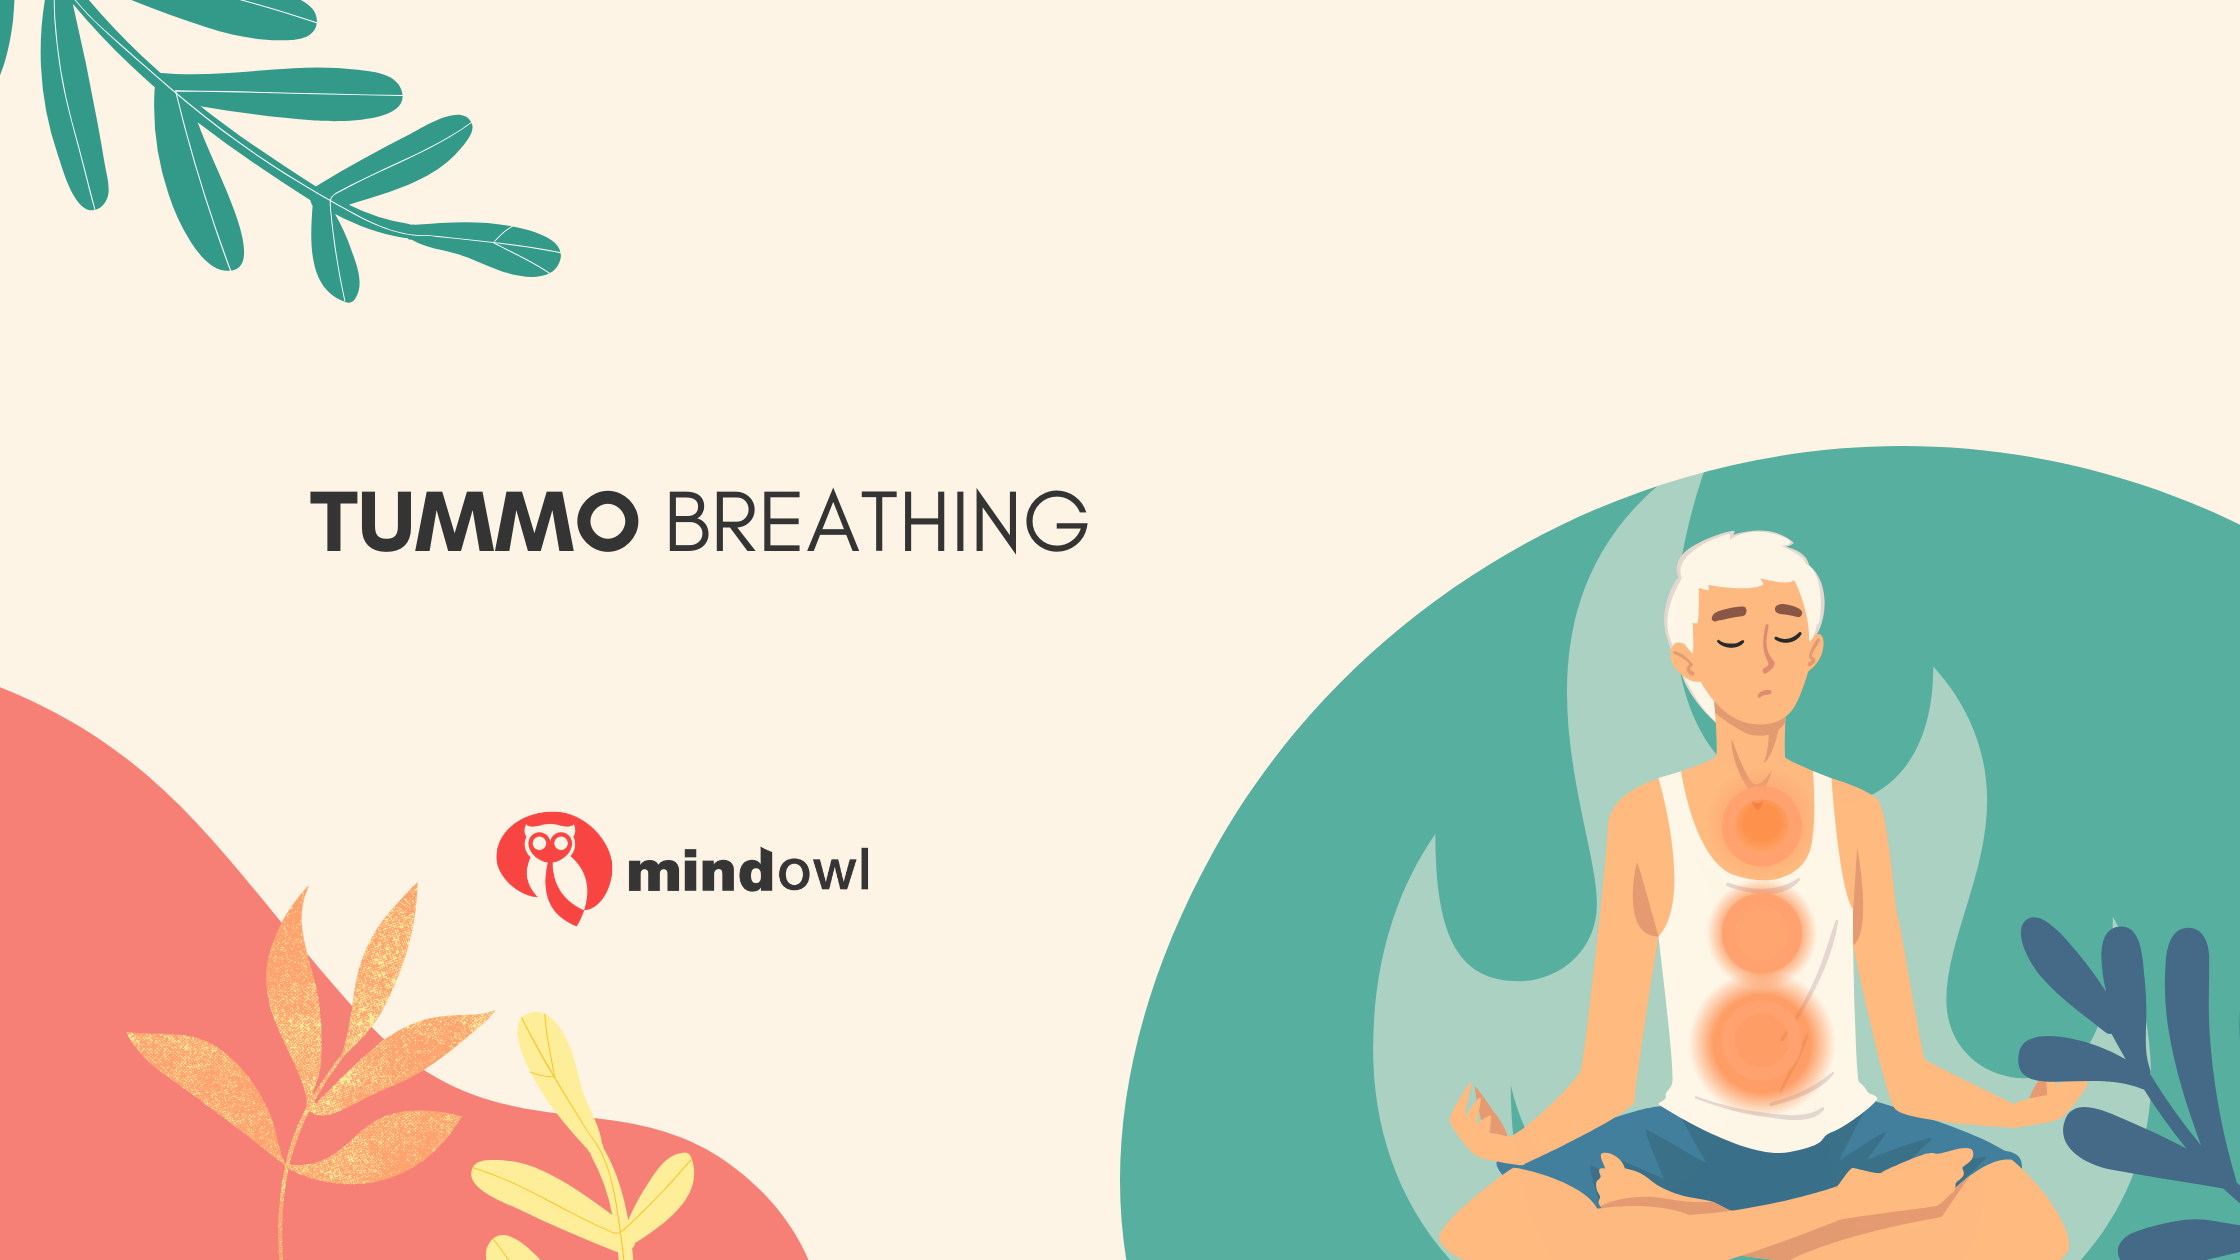 Tummo Breathing: The Ancient Tibetan Practice for Boosting Your Health and Well-Being